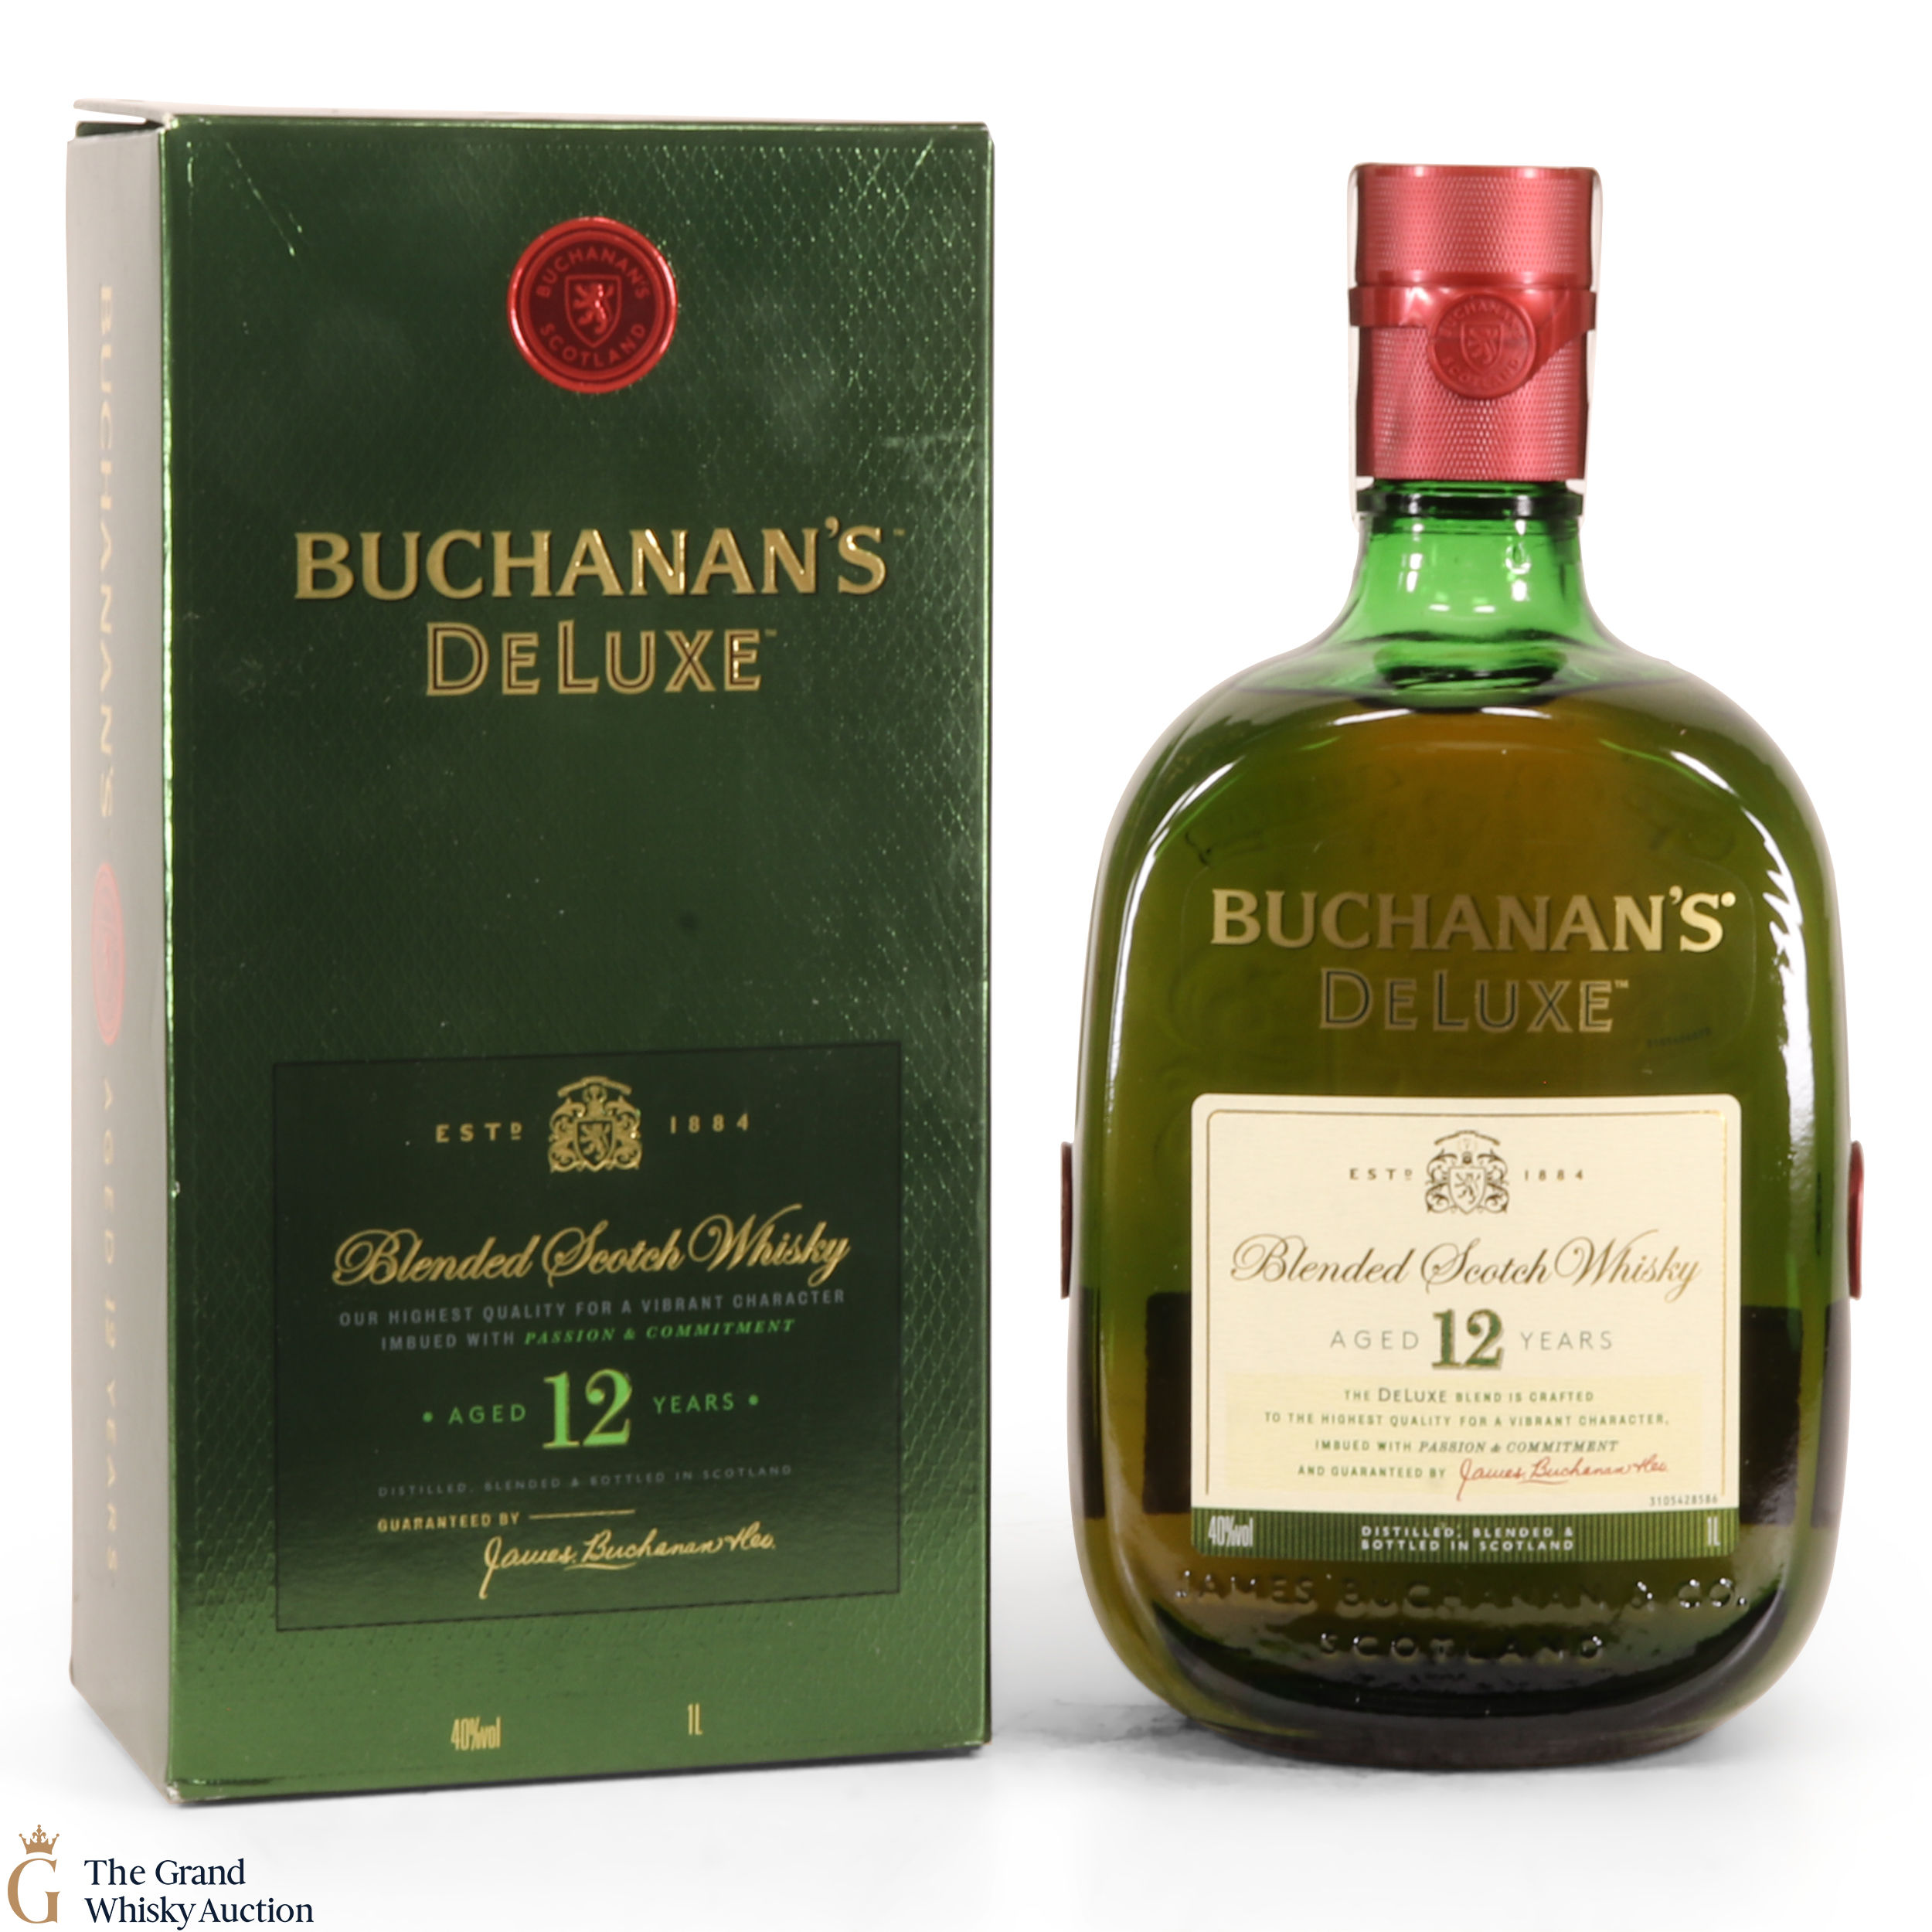 Buchanan's DeLuxe 12 Year Old Auction The Grand